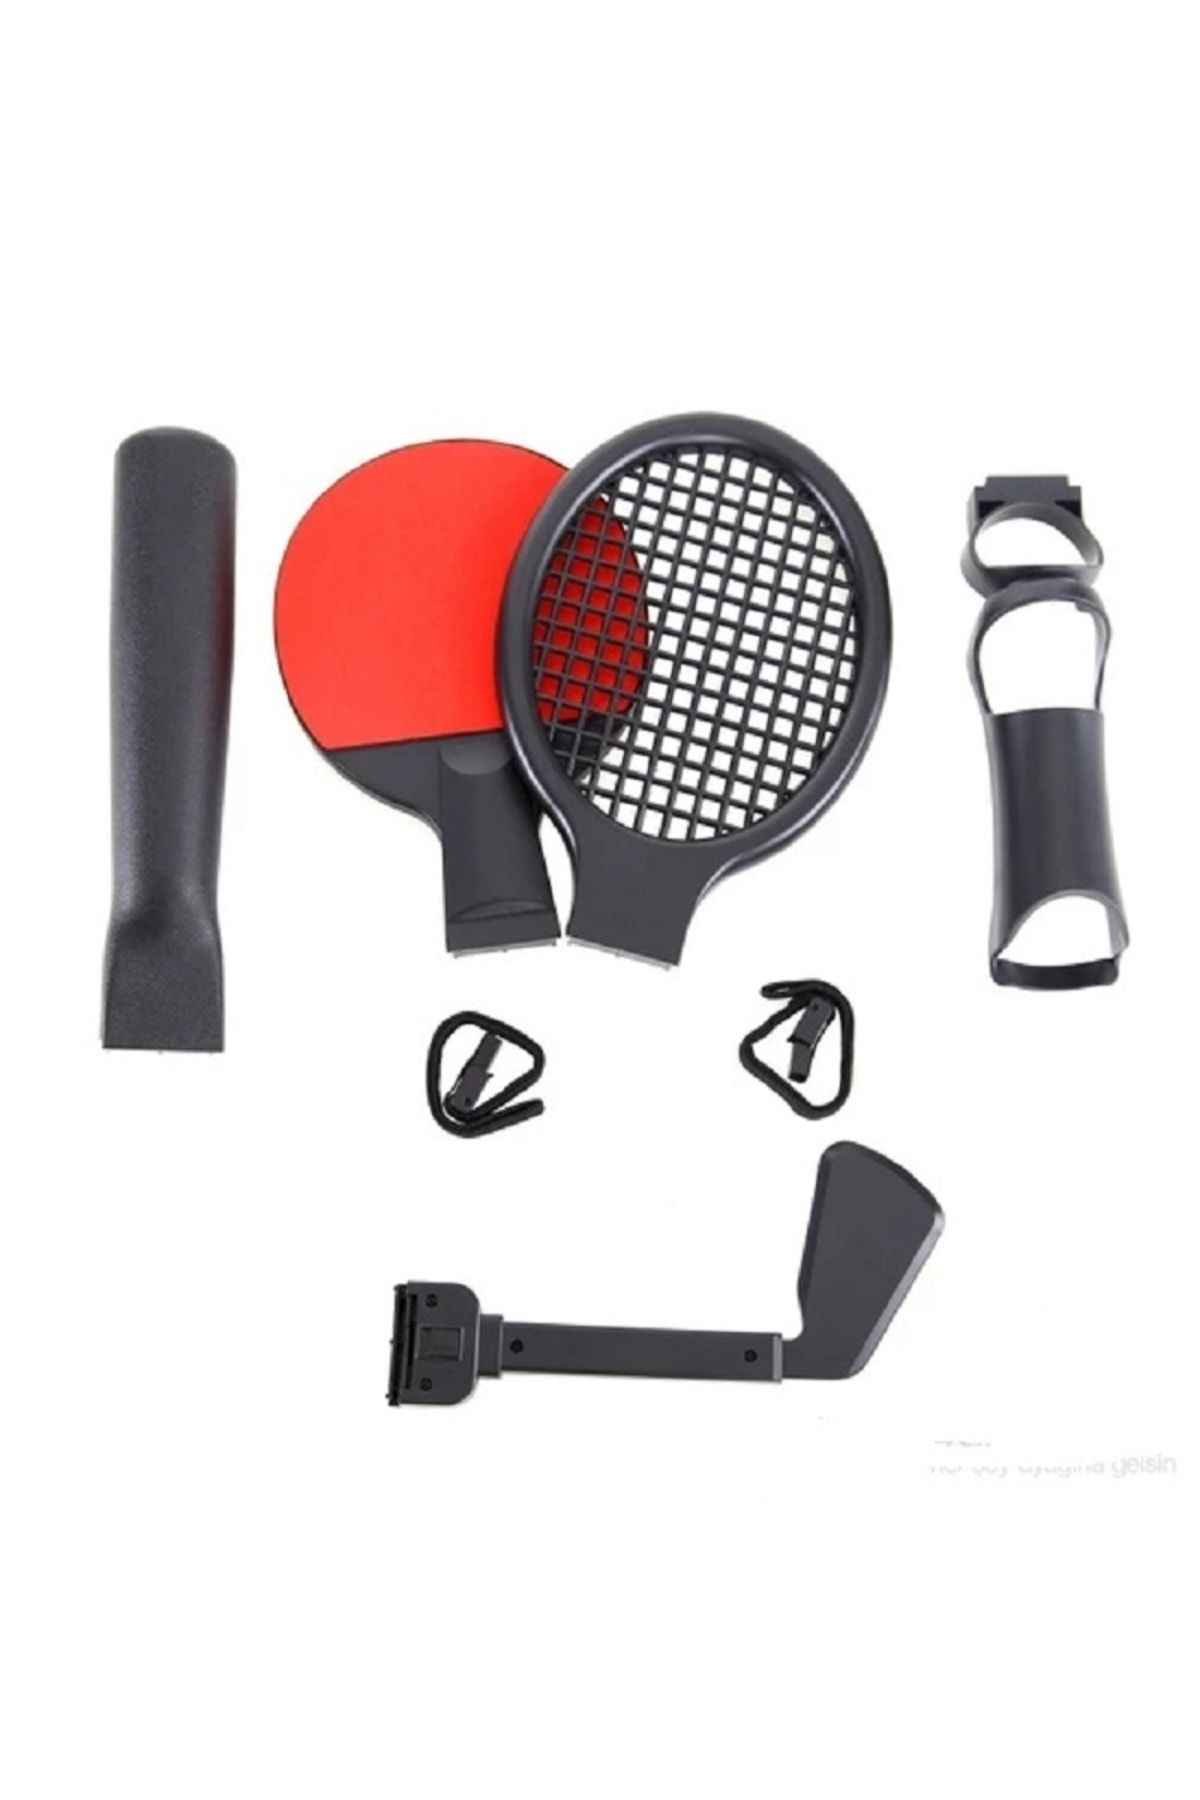 Kontorland Ps-3012 Ps3 Move Sport Pack